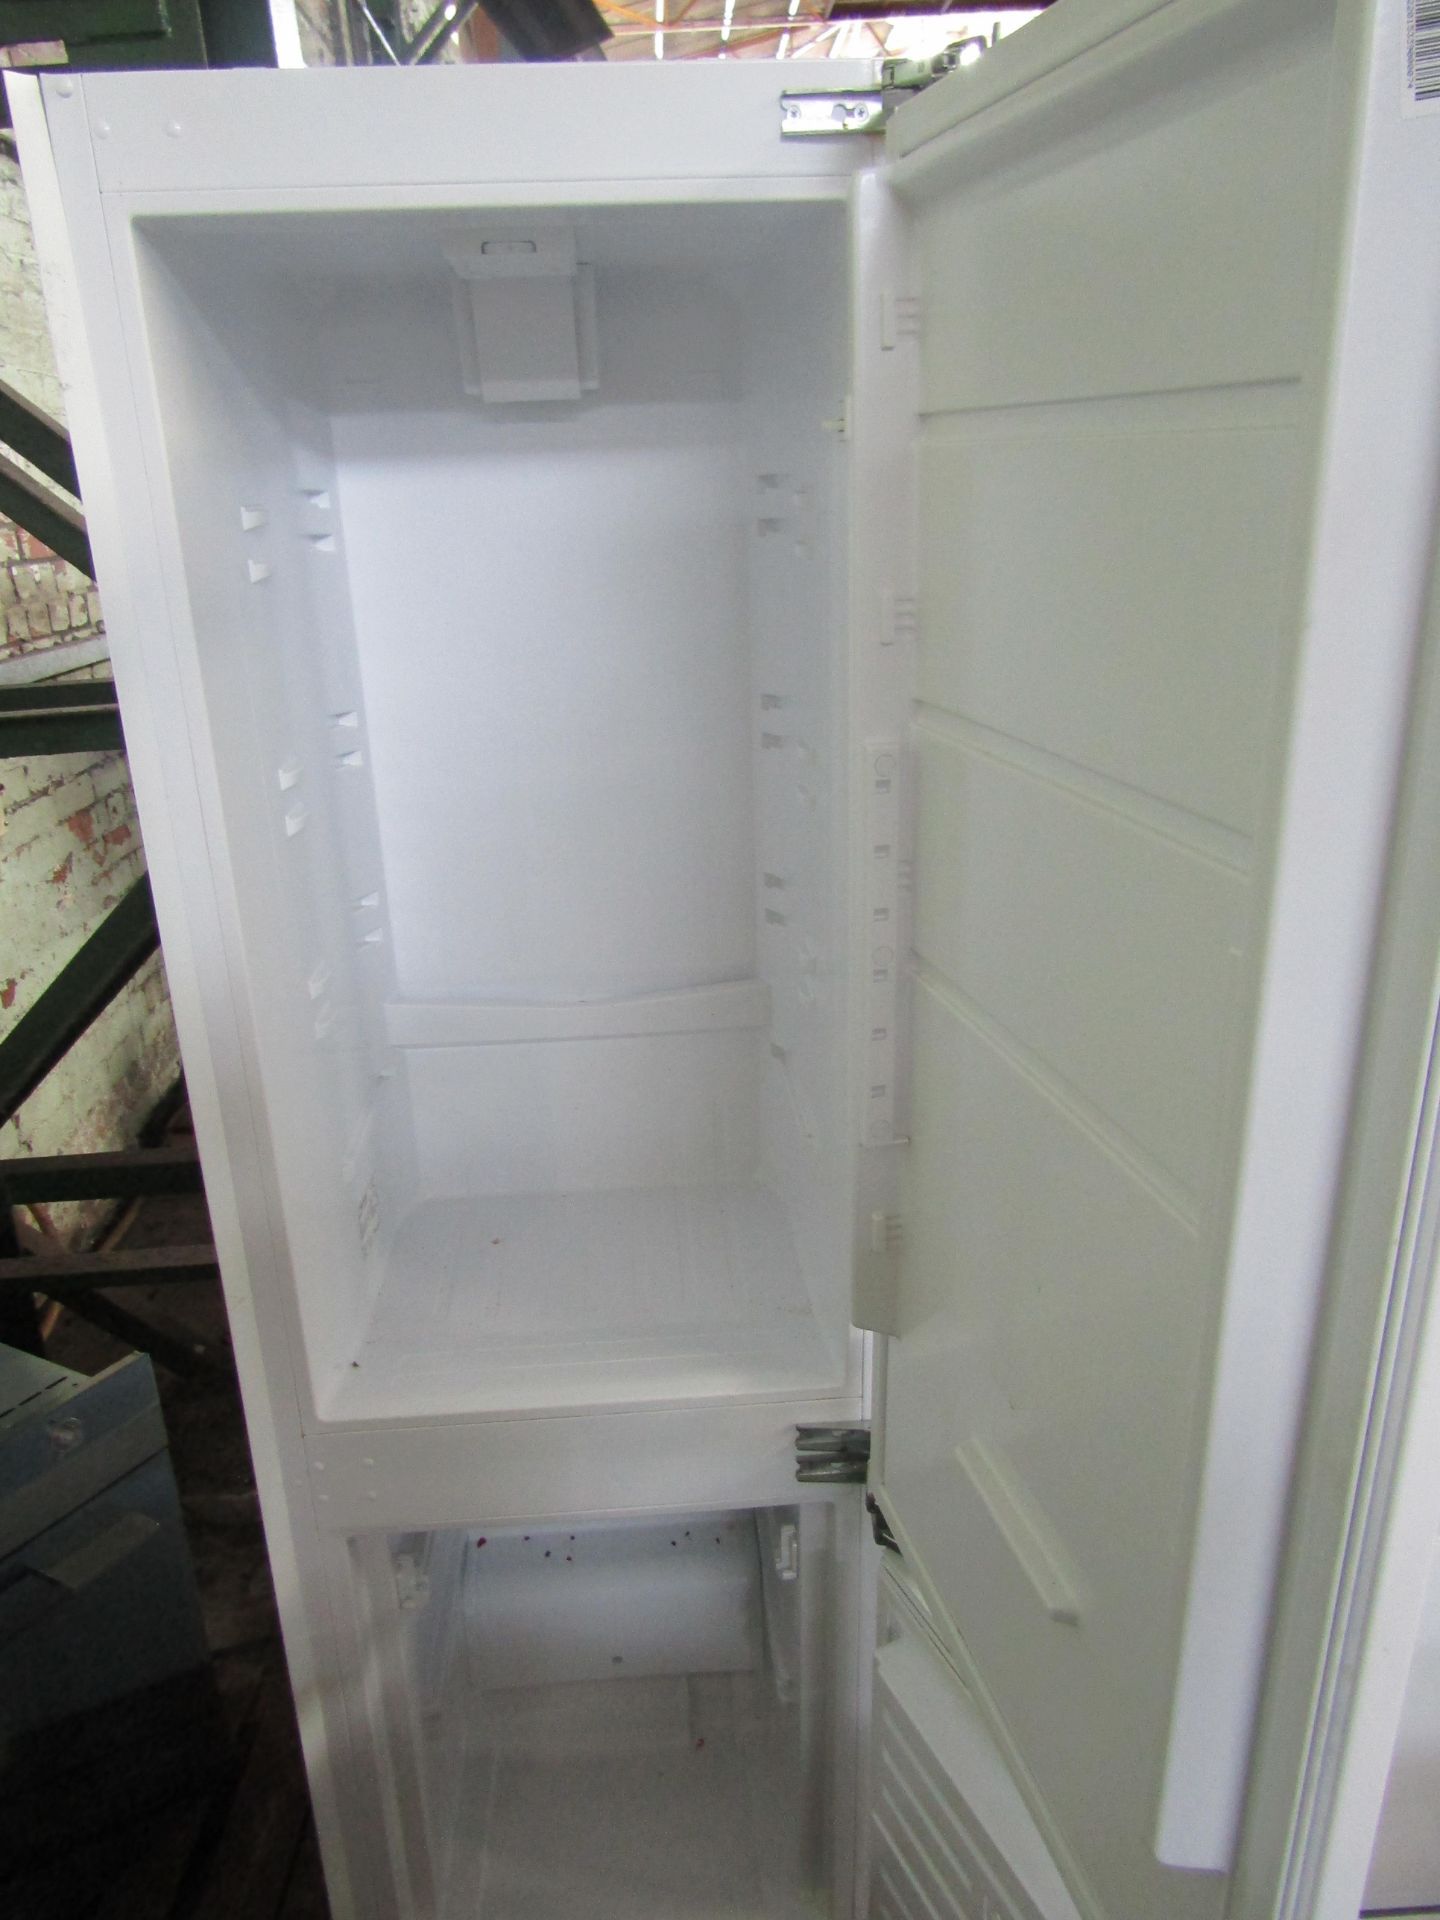 Intergrated Fridge. Powers on but does not get cold. Not shelves or drawers May Contains Dints - Image 2 of 2